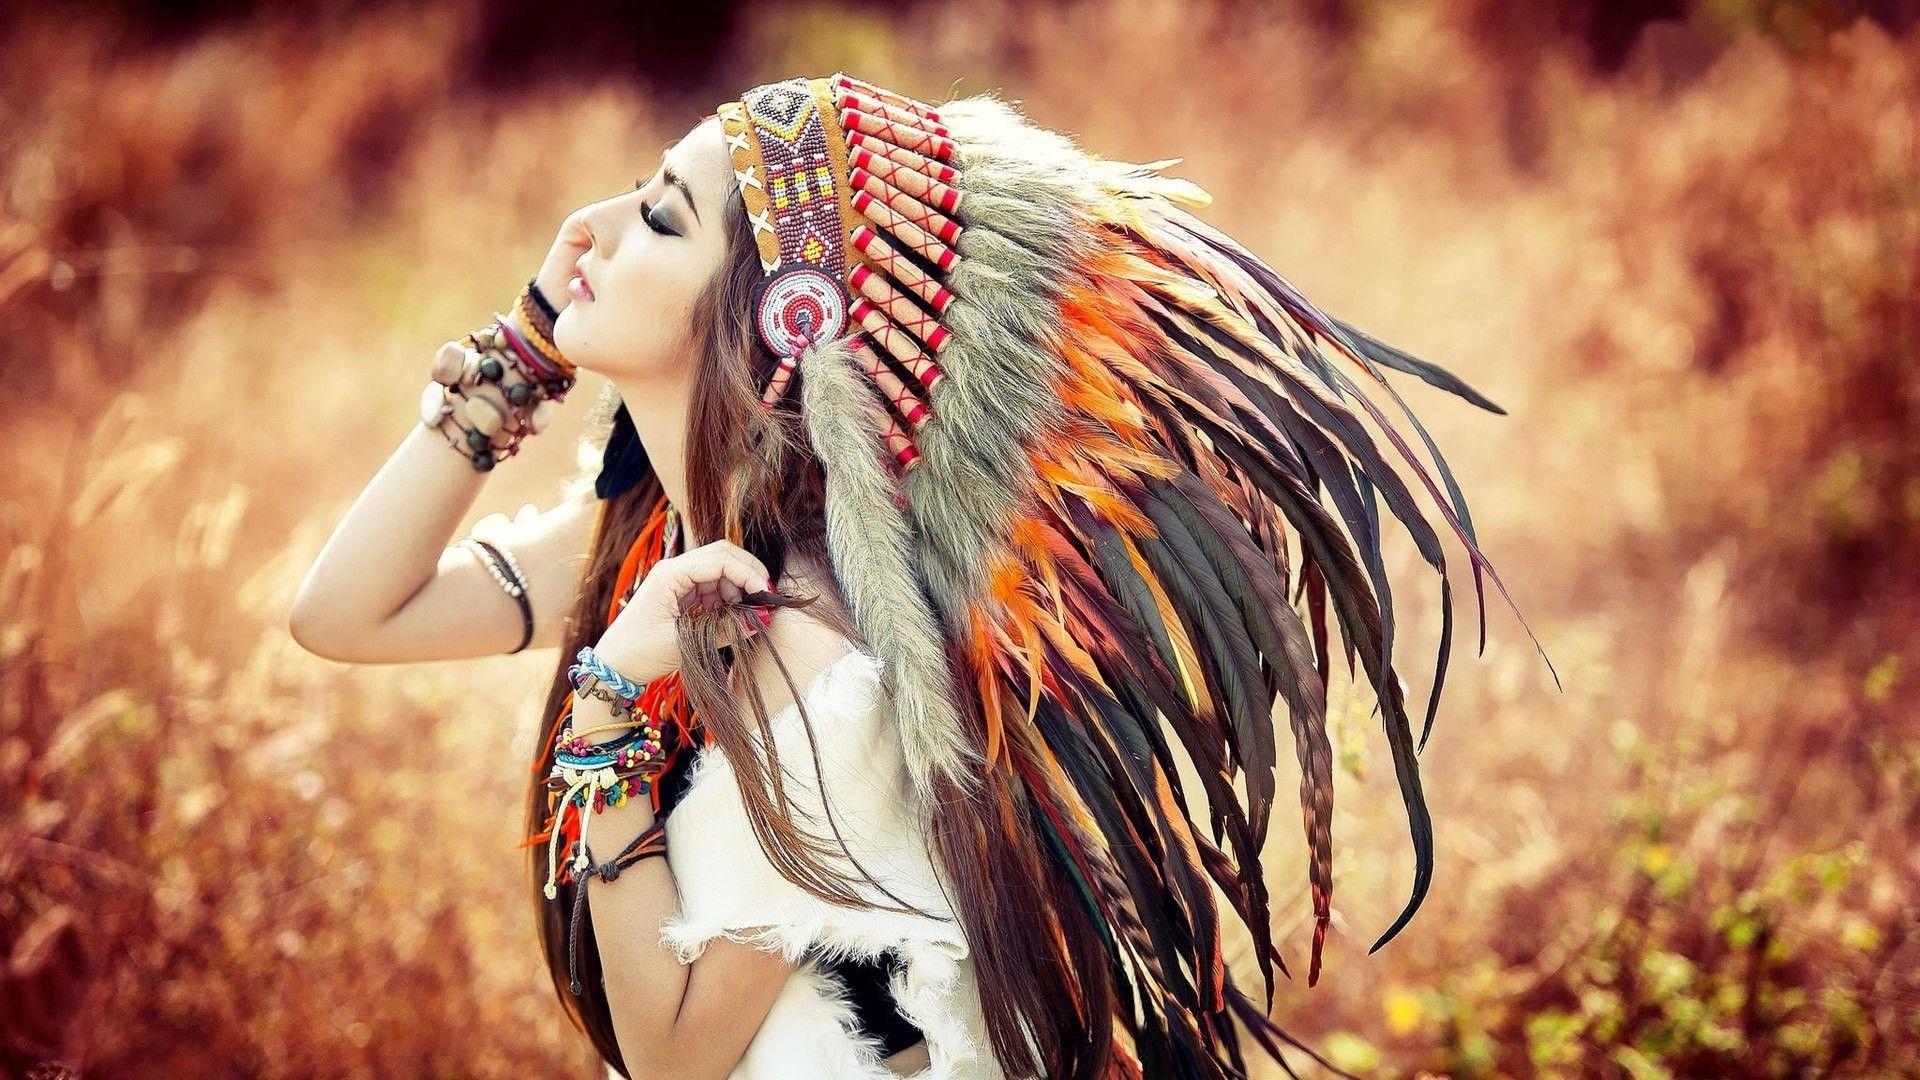 image of American Indian Background - #SpaceHero